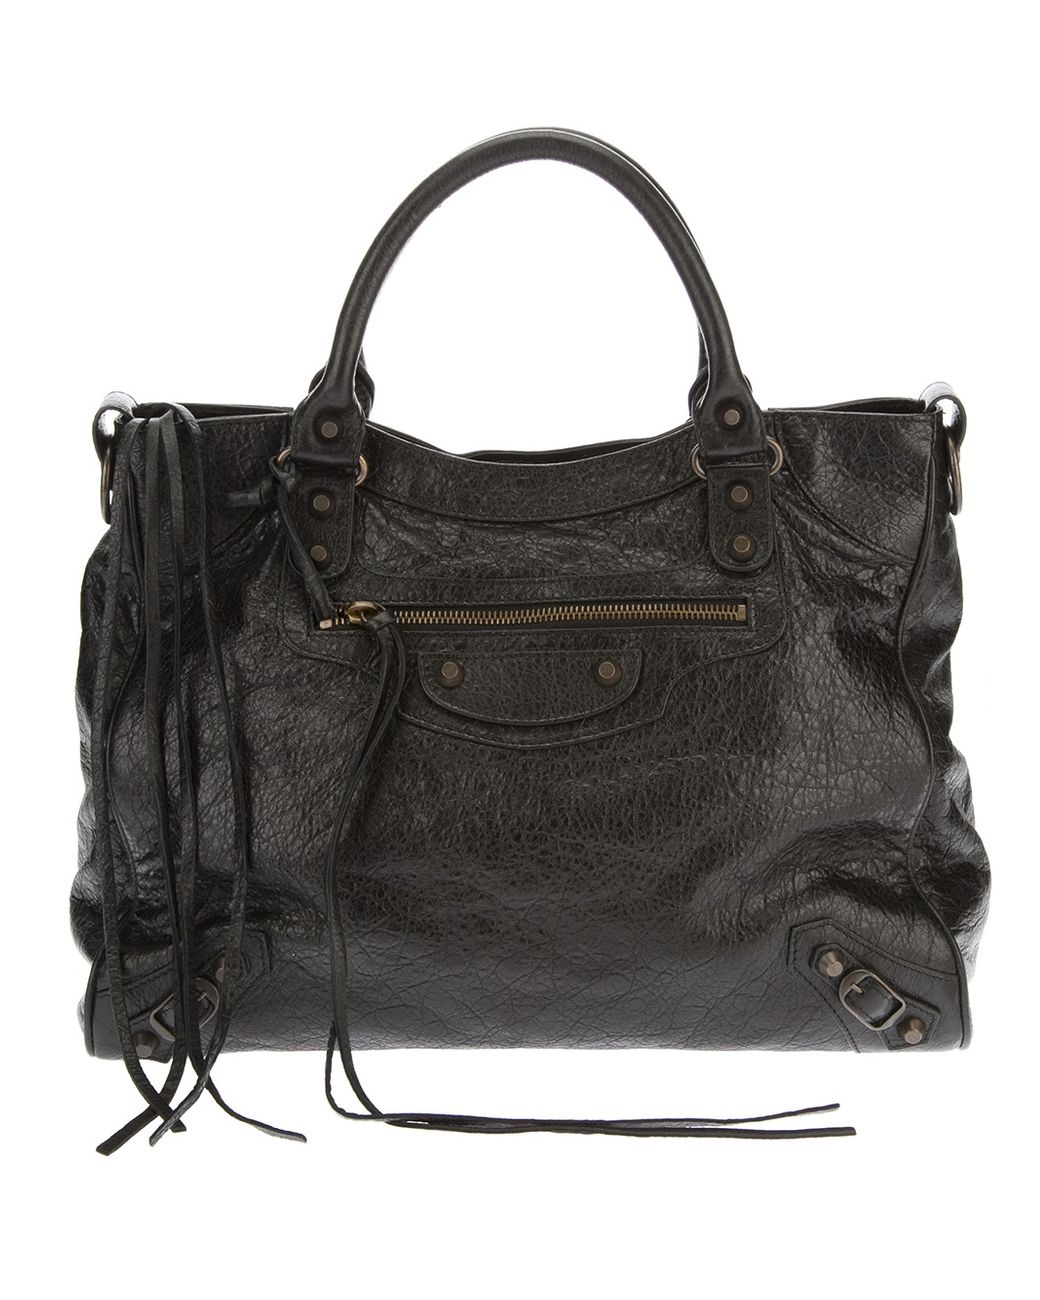 Balenciaga Leather Large 'city' Tote in Black | Lyst